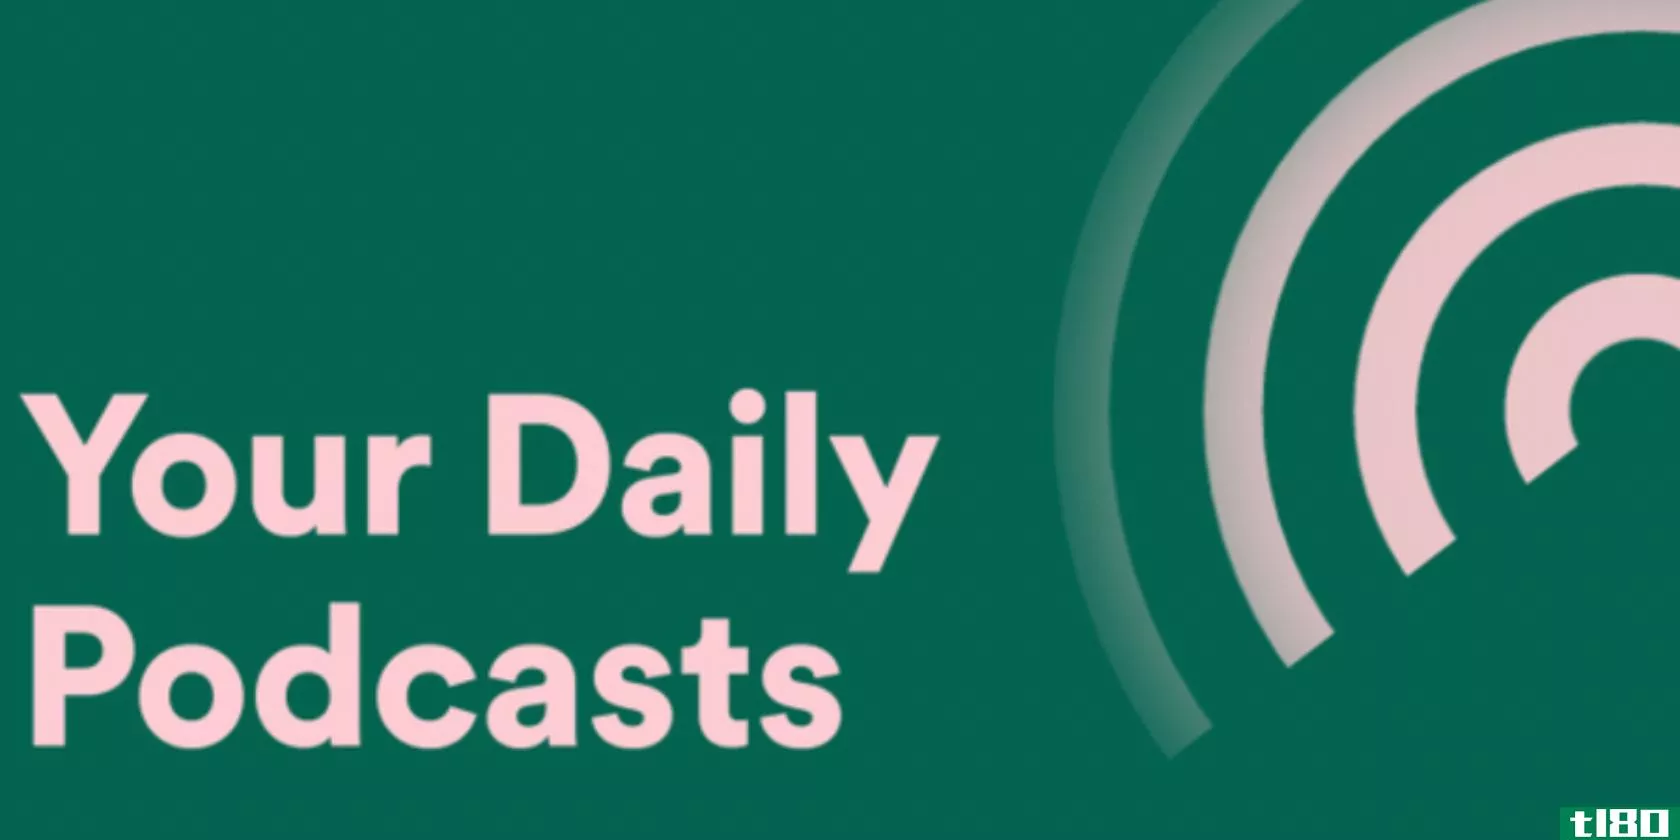 spotify-your-daily-podcasts-2